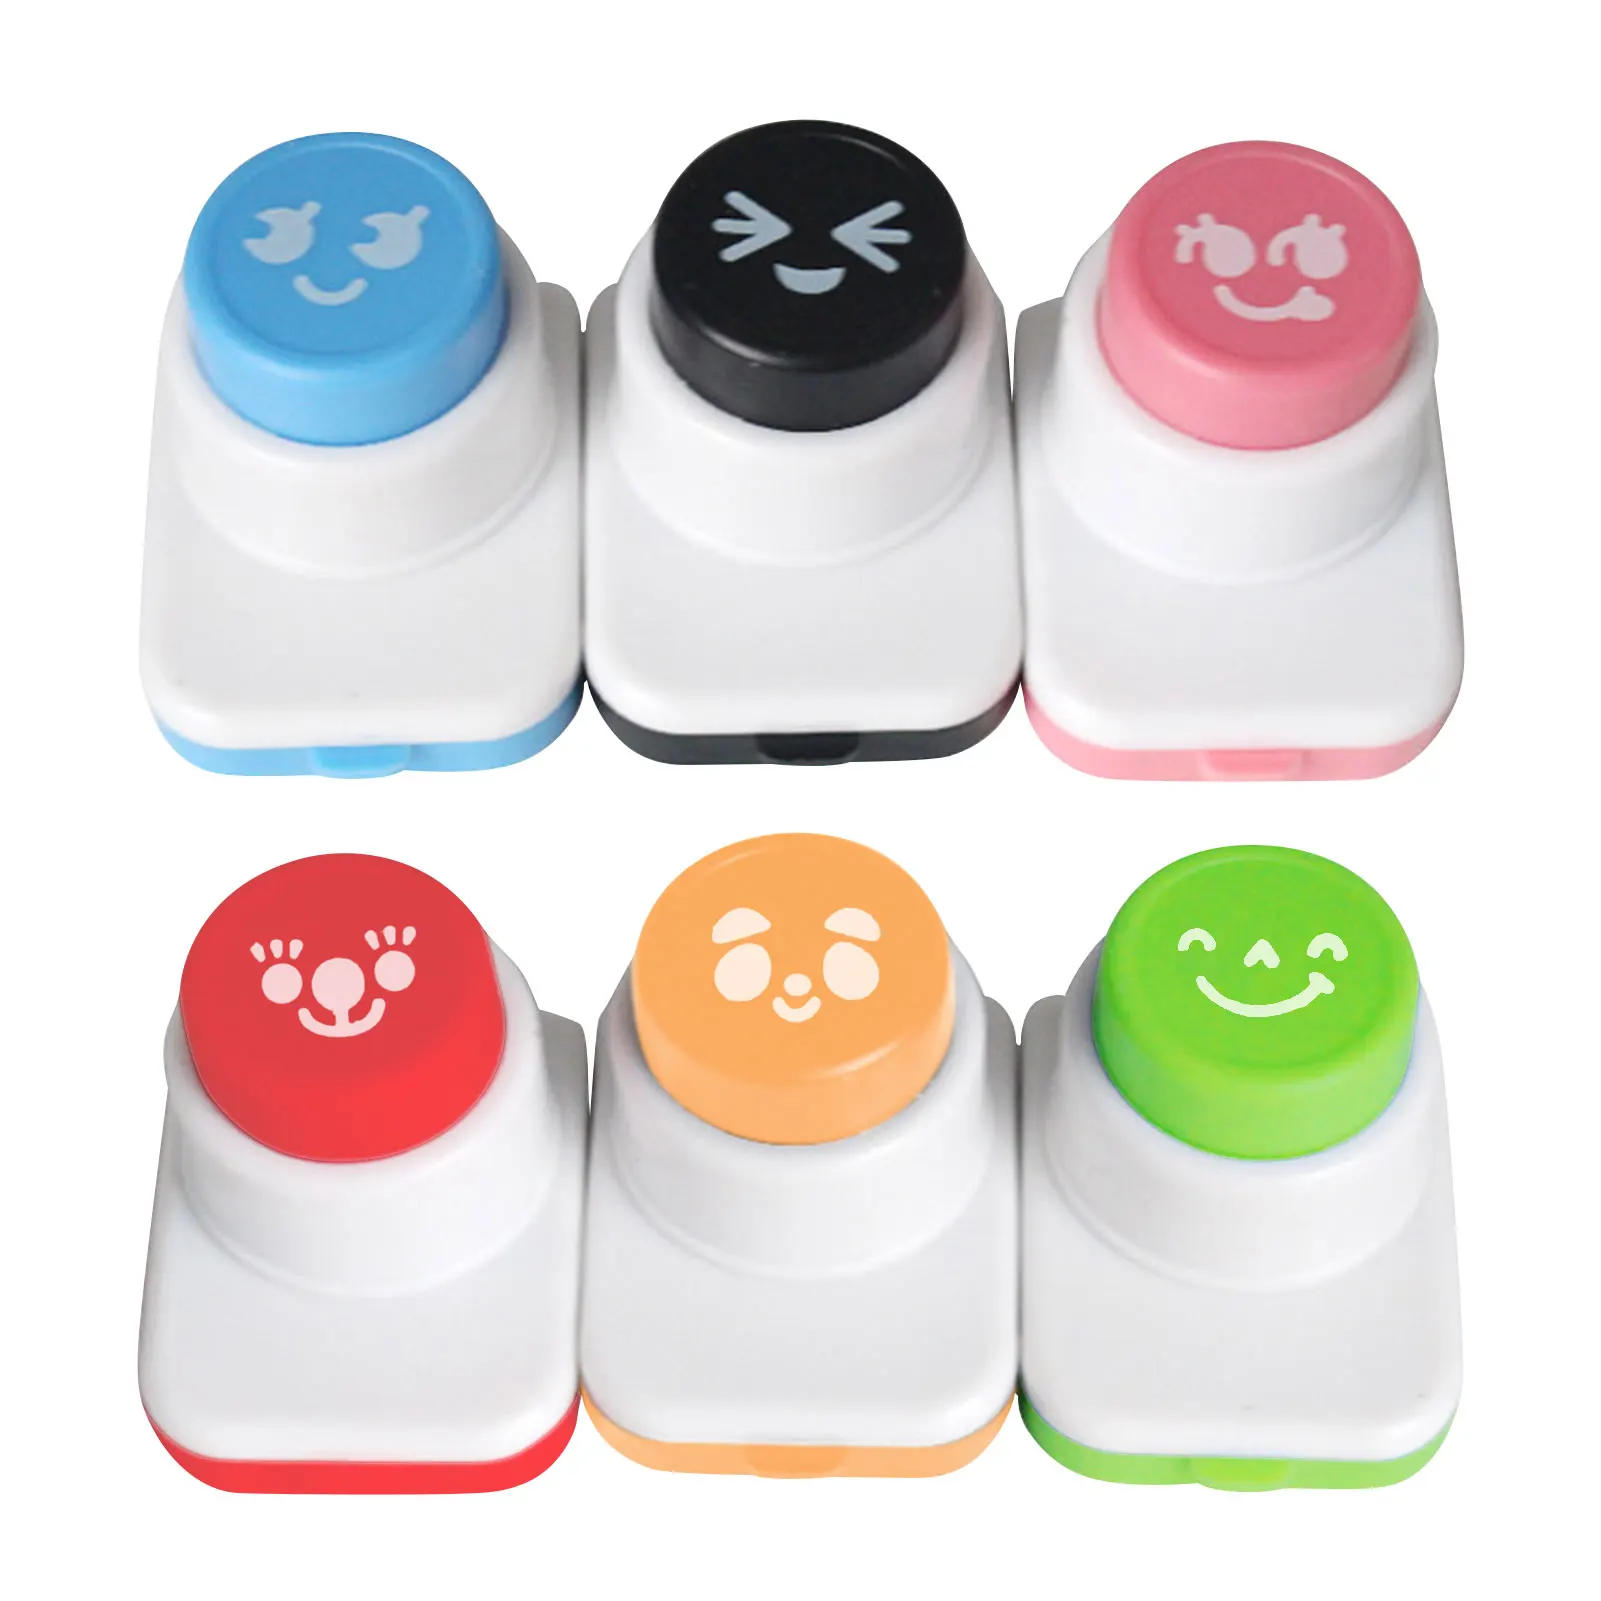 

DIY Smile Face Punch Embossing Sushi Mold Laver Seaweed Bento Accessories Rice Ball Vegetable Roll Onigiri Mould Sushi Tool